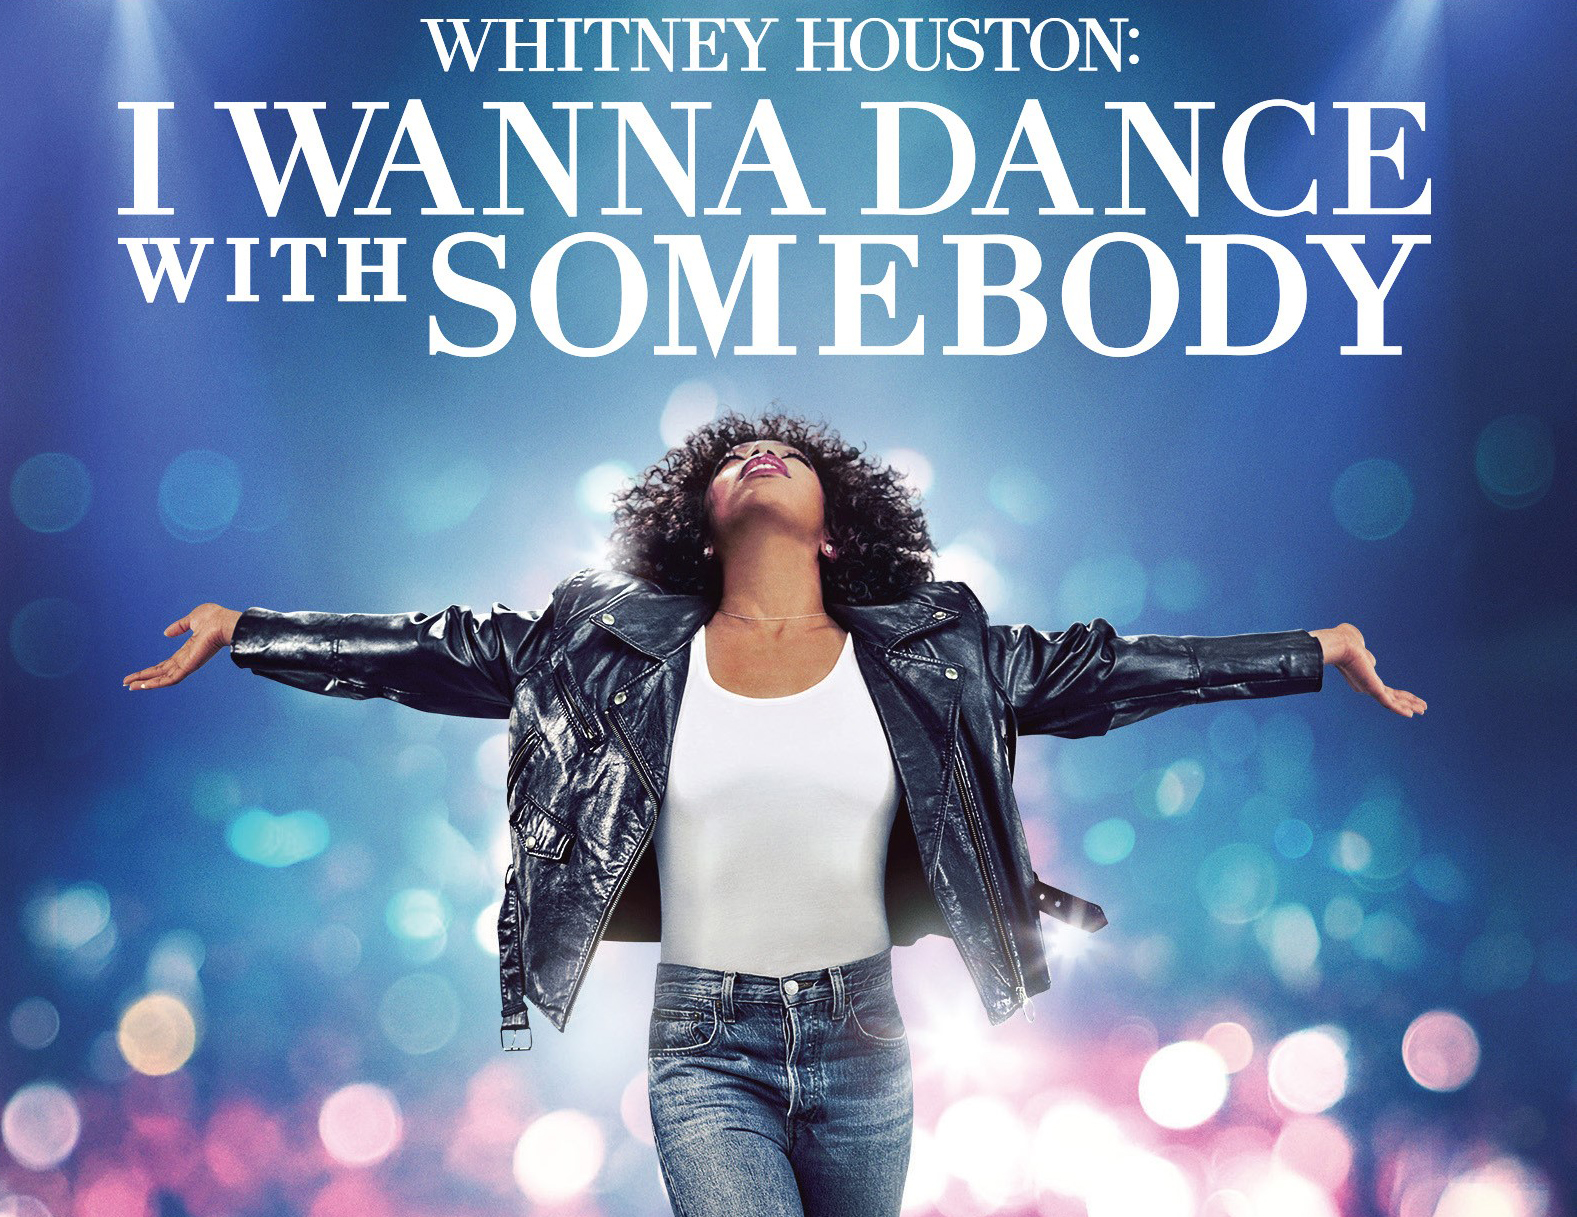 ‘Whitney Houston: I Wanna Dance with Somebody’ Arrives on Blu-ray and DVD on February 28